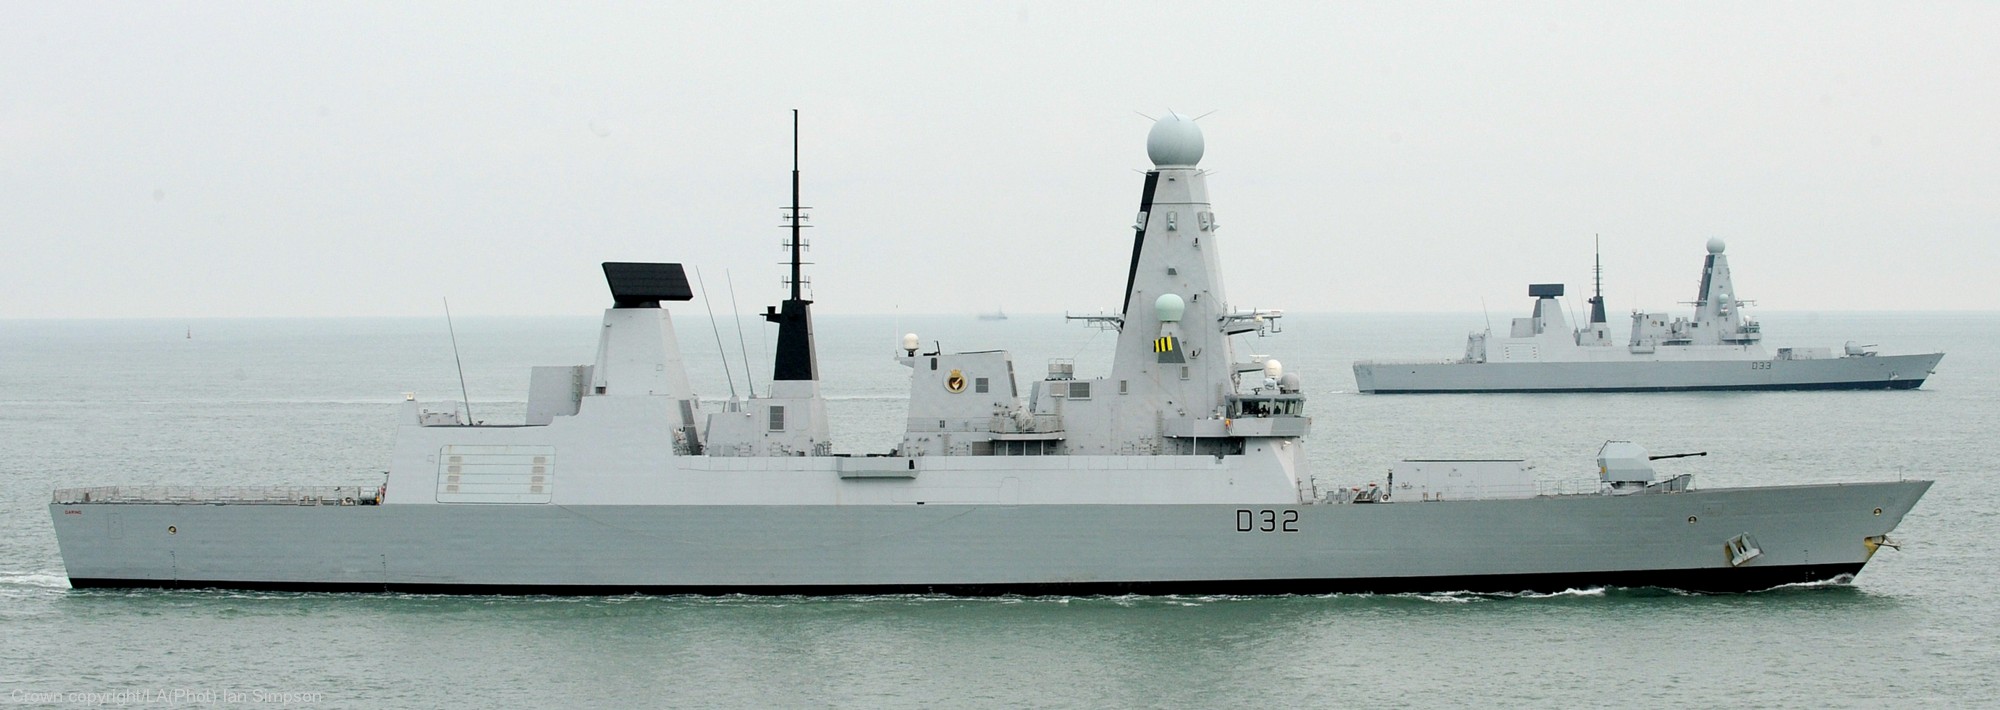 hms daring d-32 type 45 class guided missile destroyer royal navy sea viper paams 34